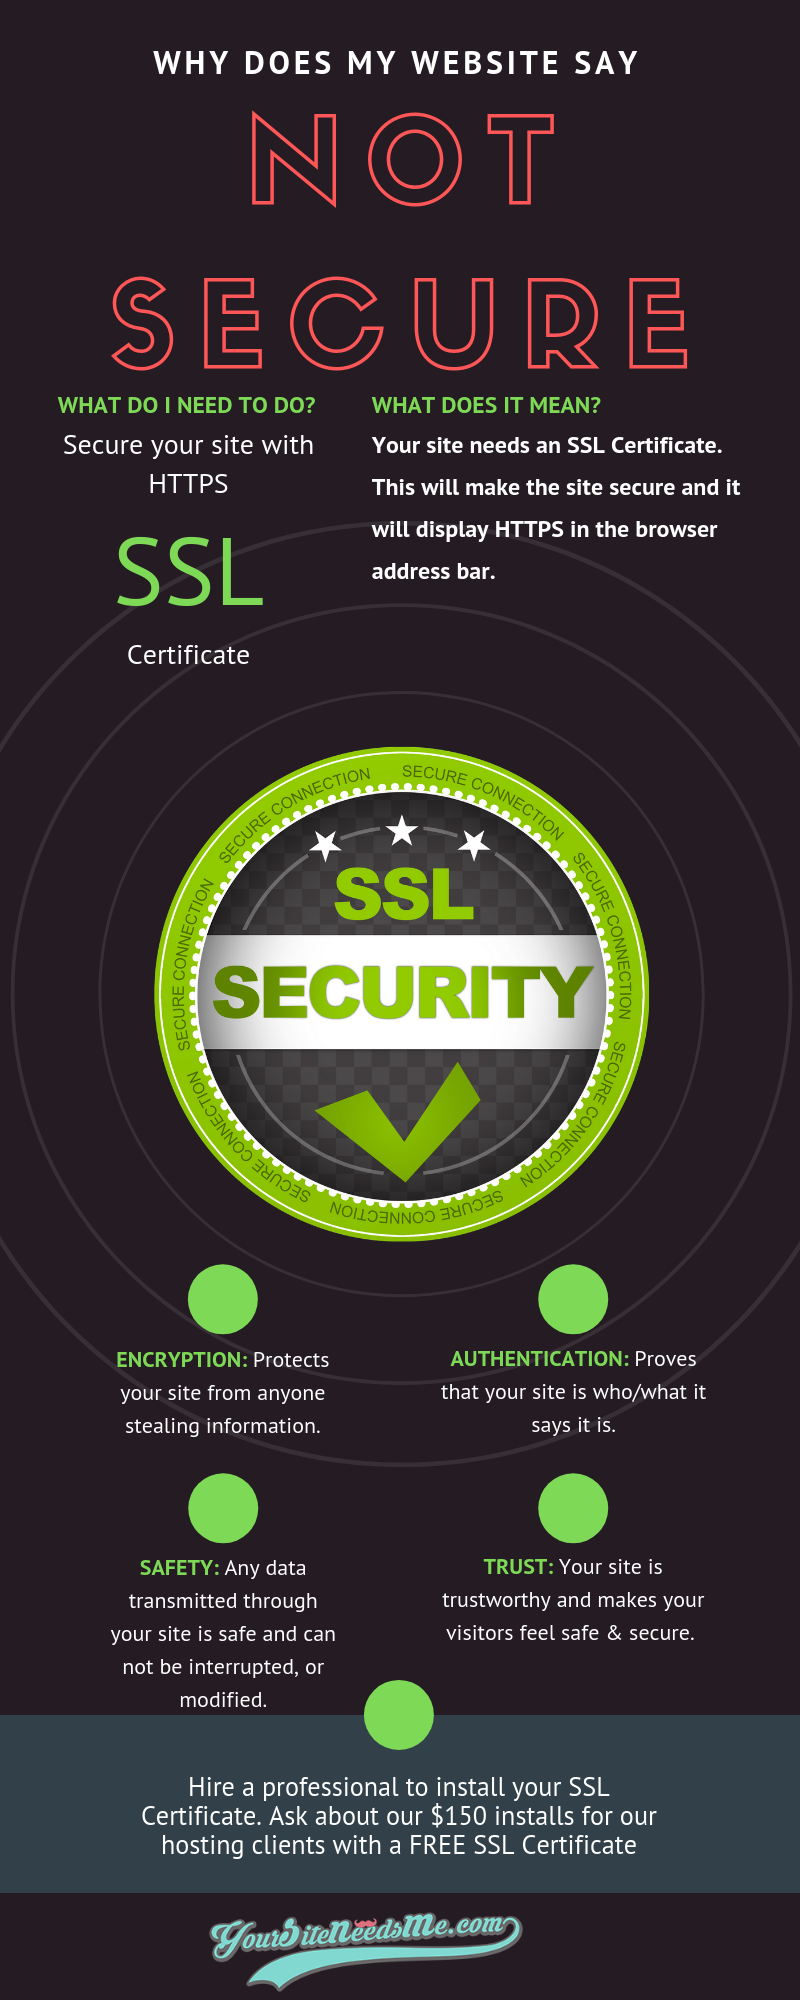 SSL Certificates & HTTPS: What is it and why do I need it?